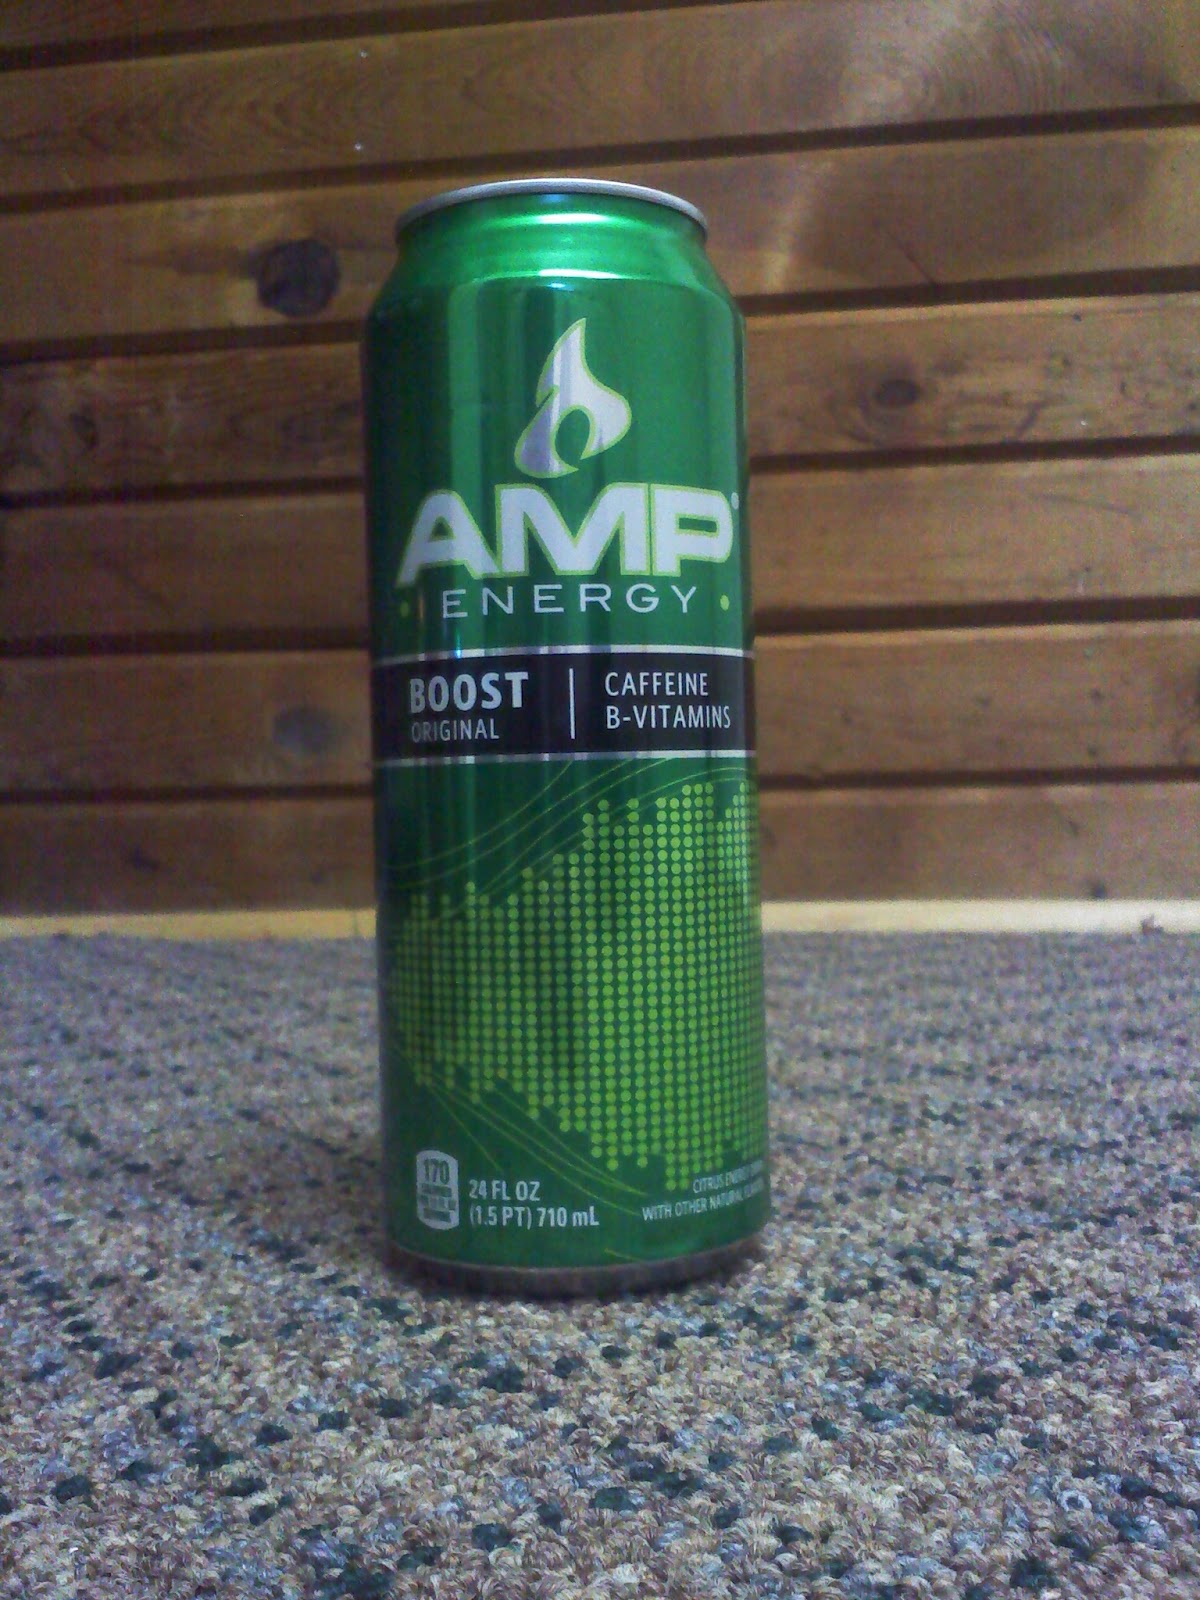 Are Amp Energy Drinks Being Discontinued? - Answereco